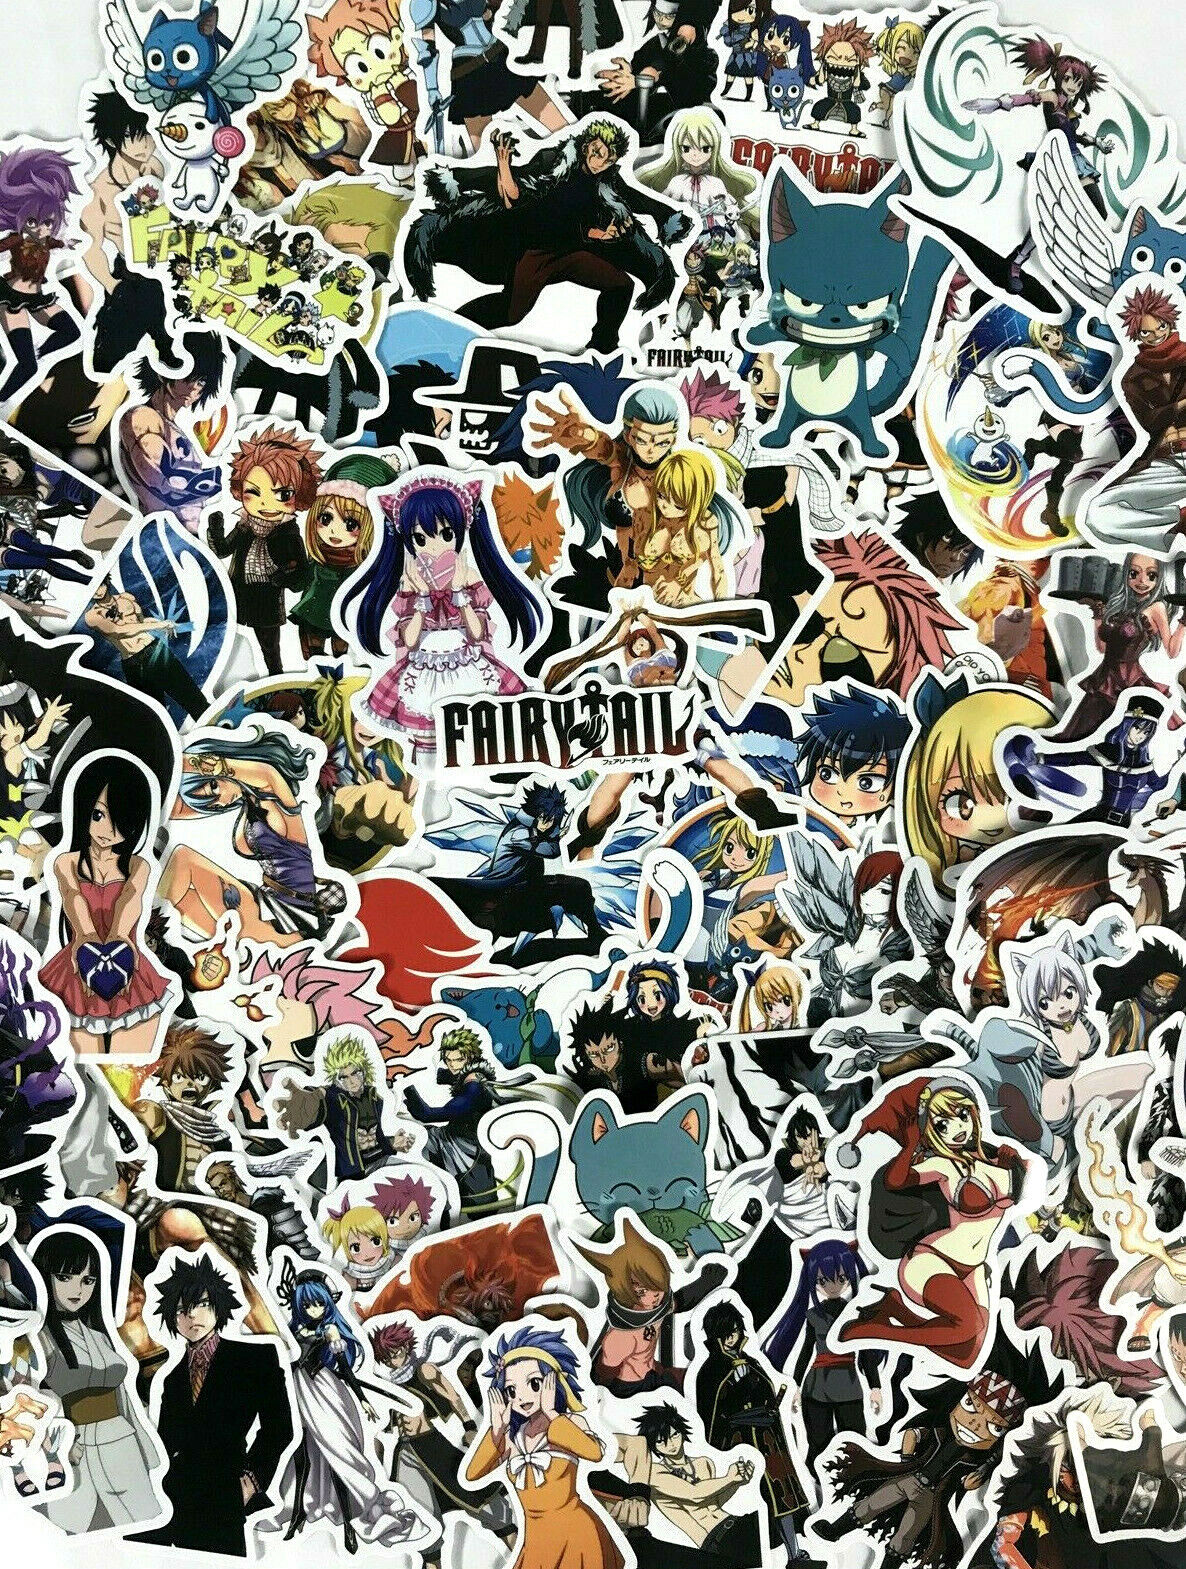 100pc Fairy Tail Anime Guild Wizards Manga Series Notebook Laptop Decal Stickers